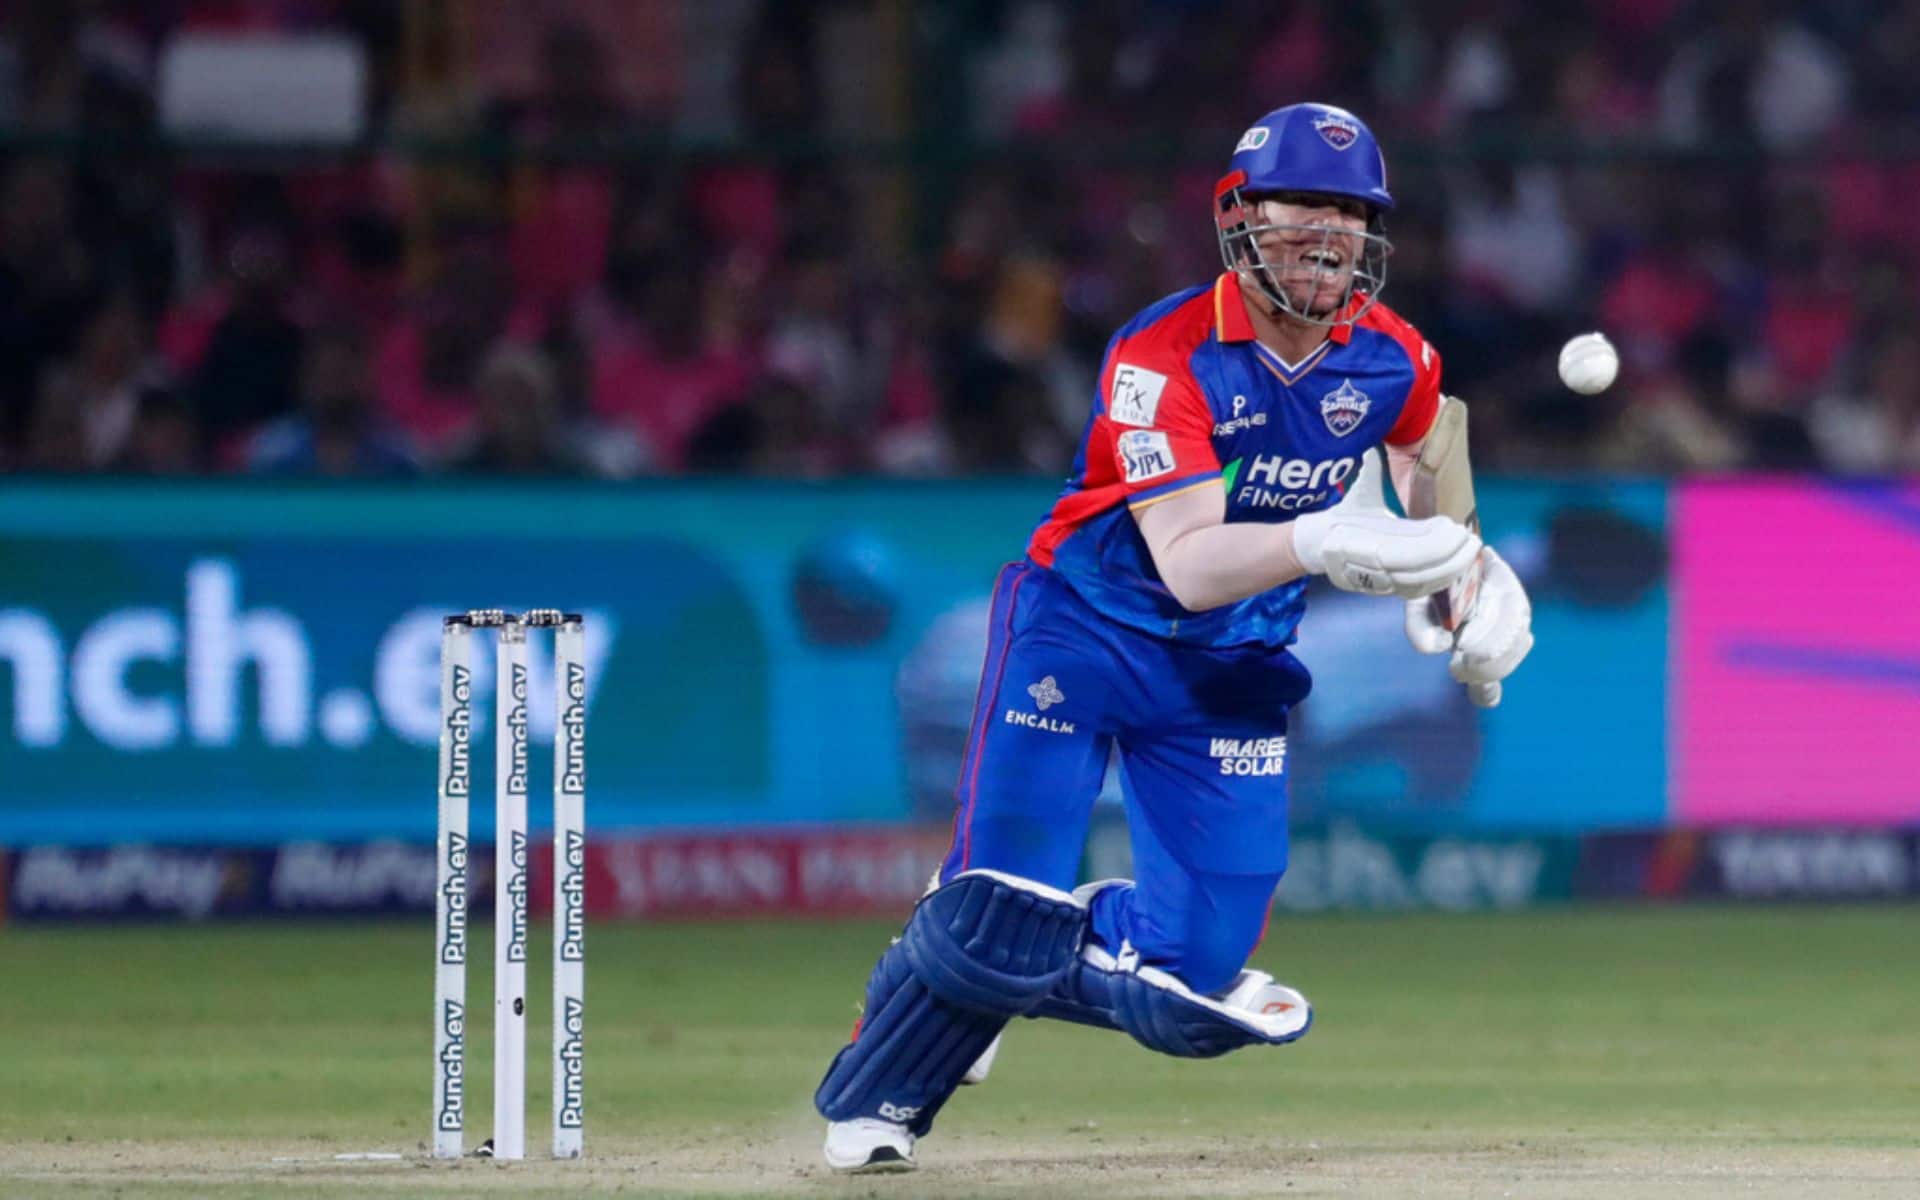 David Warner will be the best choice from DC as the C or VC [iplt20.com]